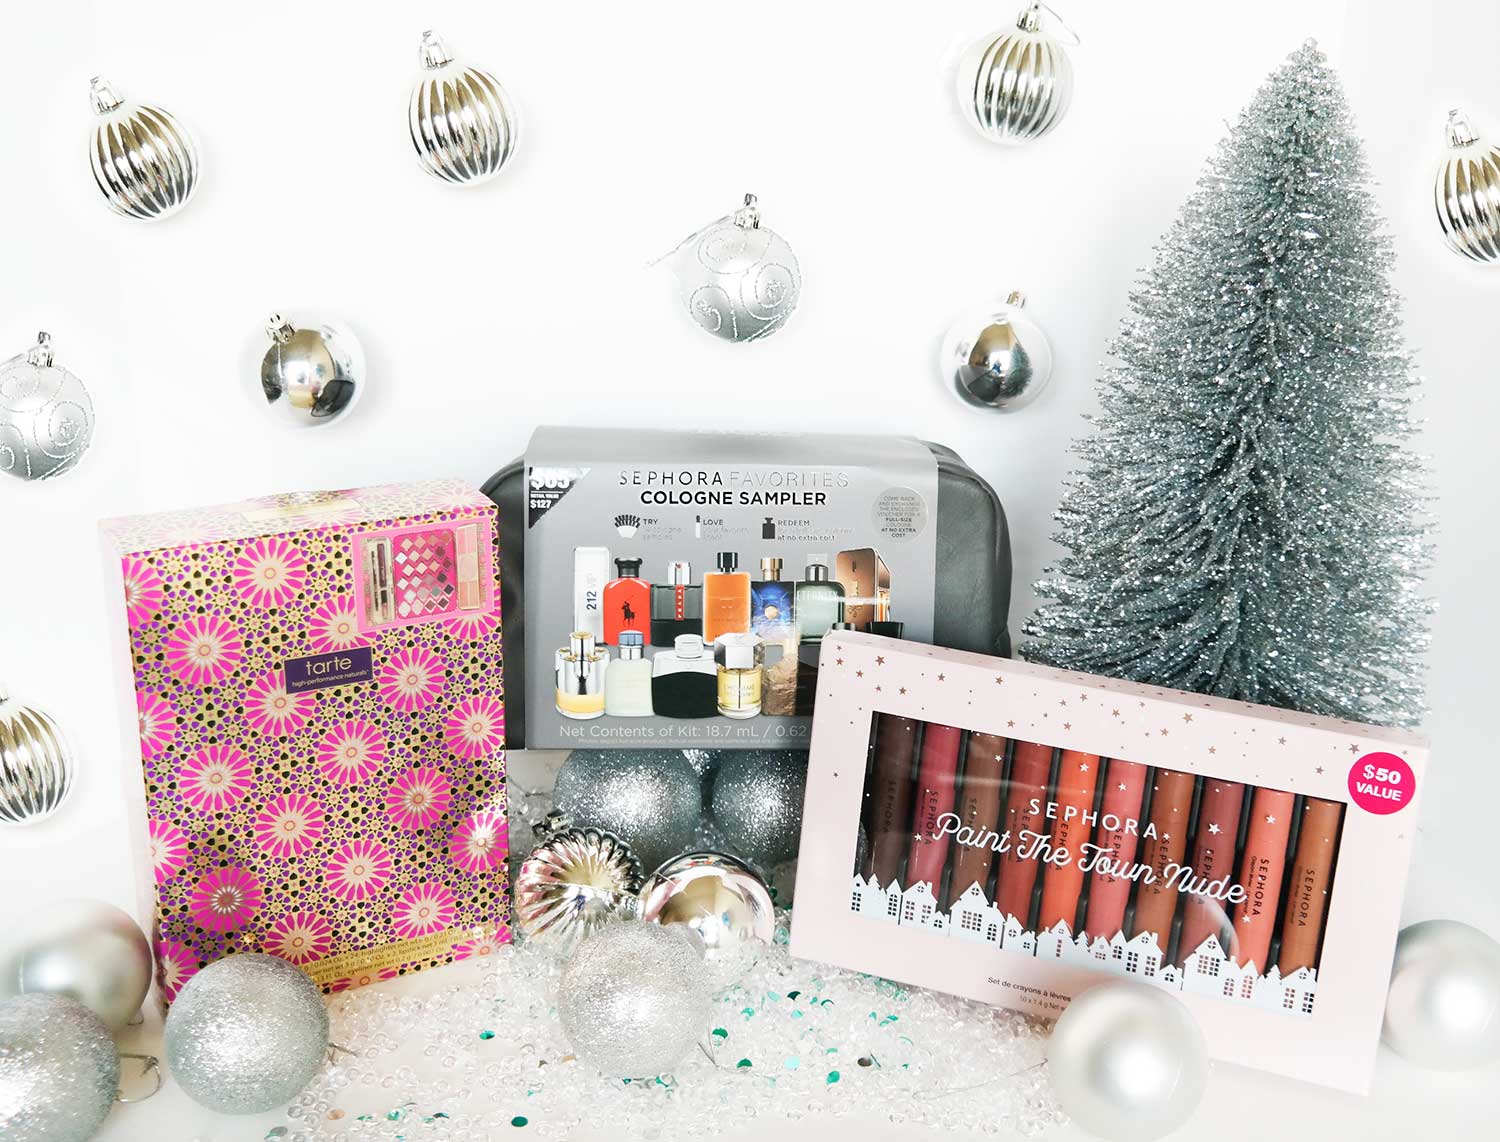 Holiday Gift Ideas with Sephora inside JCPenney - Lipstick & Brunch